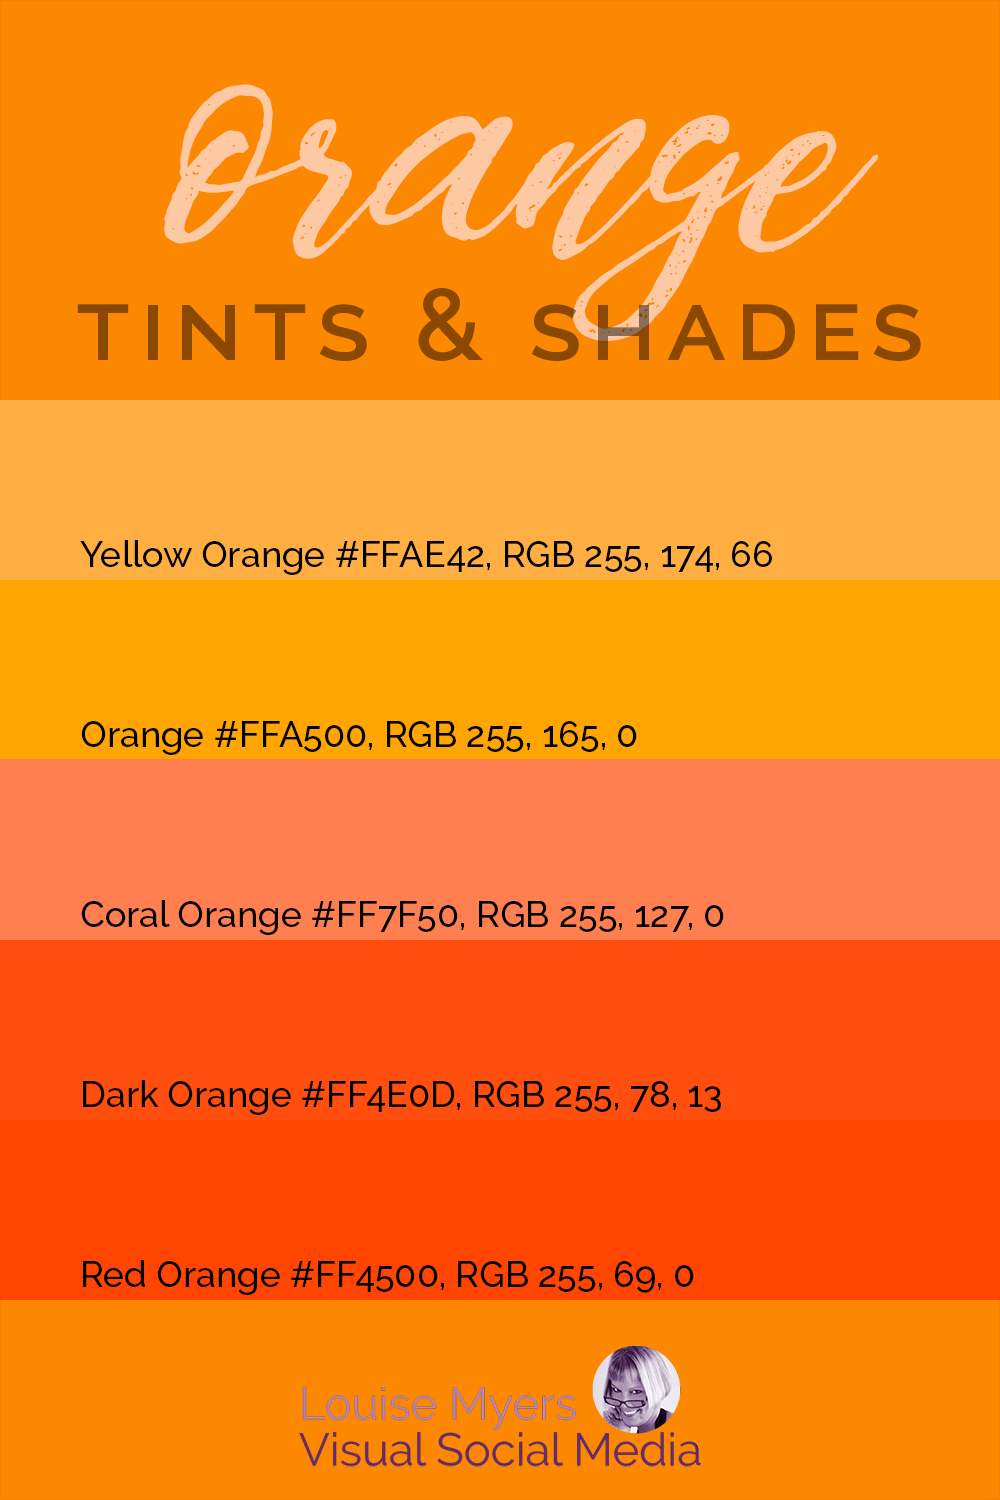 orange grapic shows color codes for various tints and shades of orange.